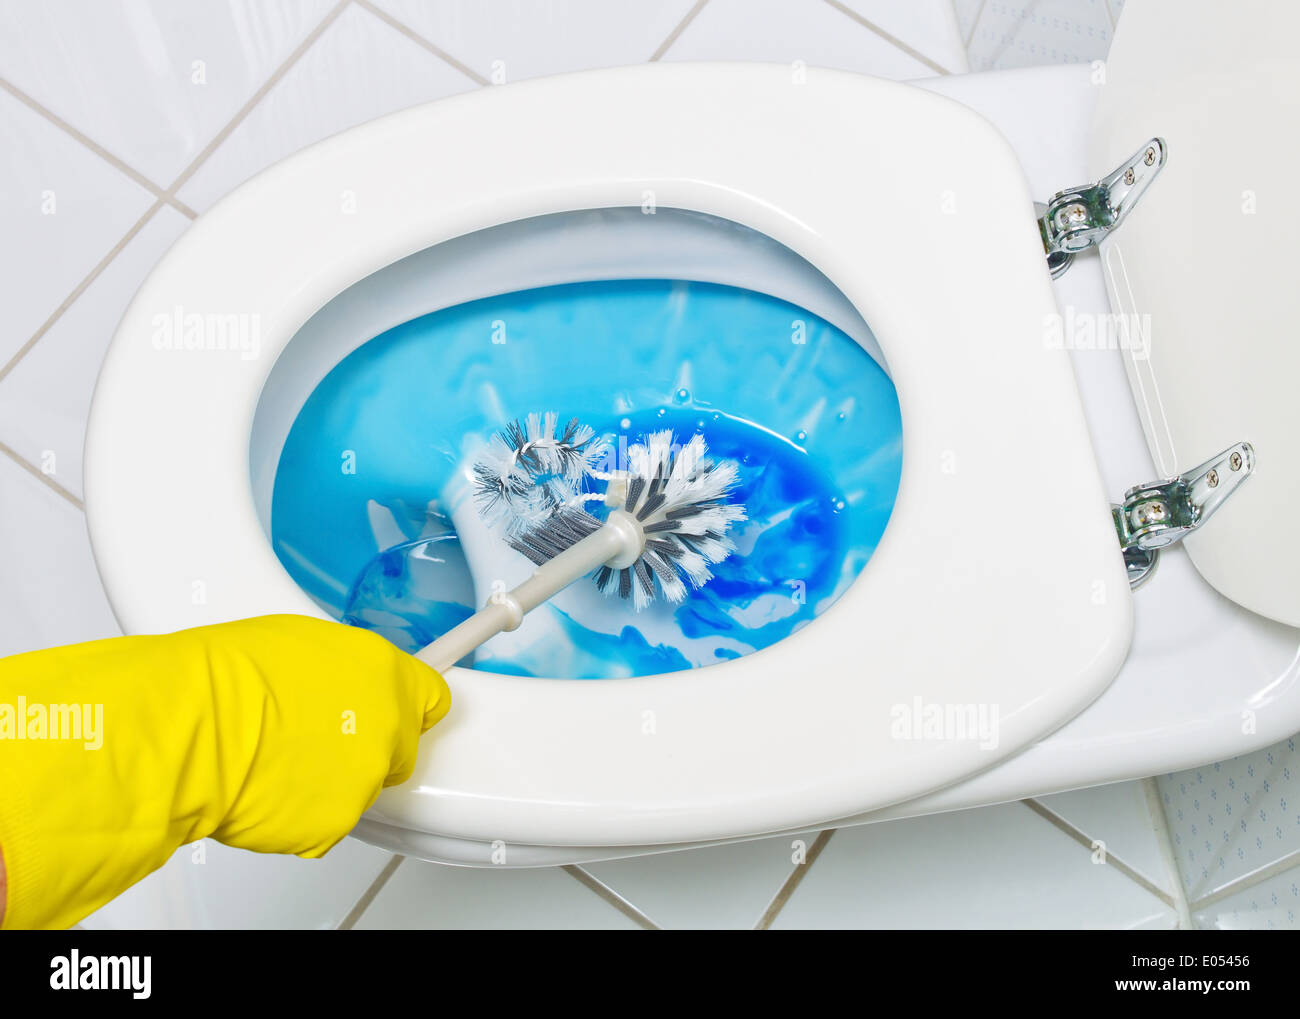 Toilet loo WC toilets toilet loo set toilet cleaning cleaning clean cleanly at home cleaning materials cleaning day spring-clean Stock Photo